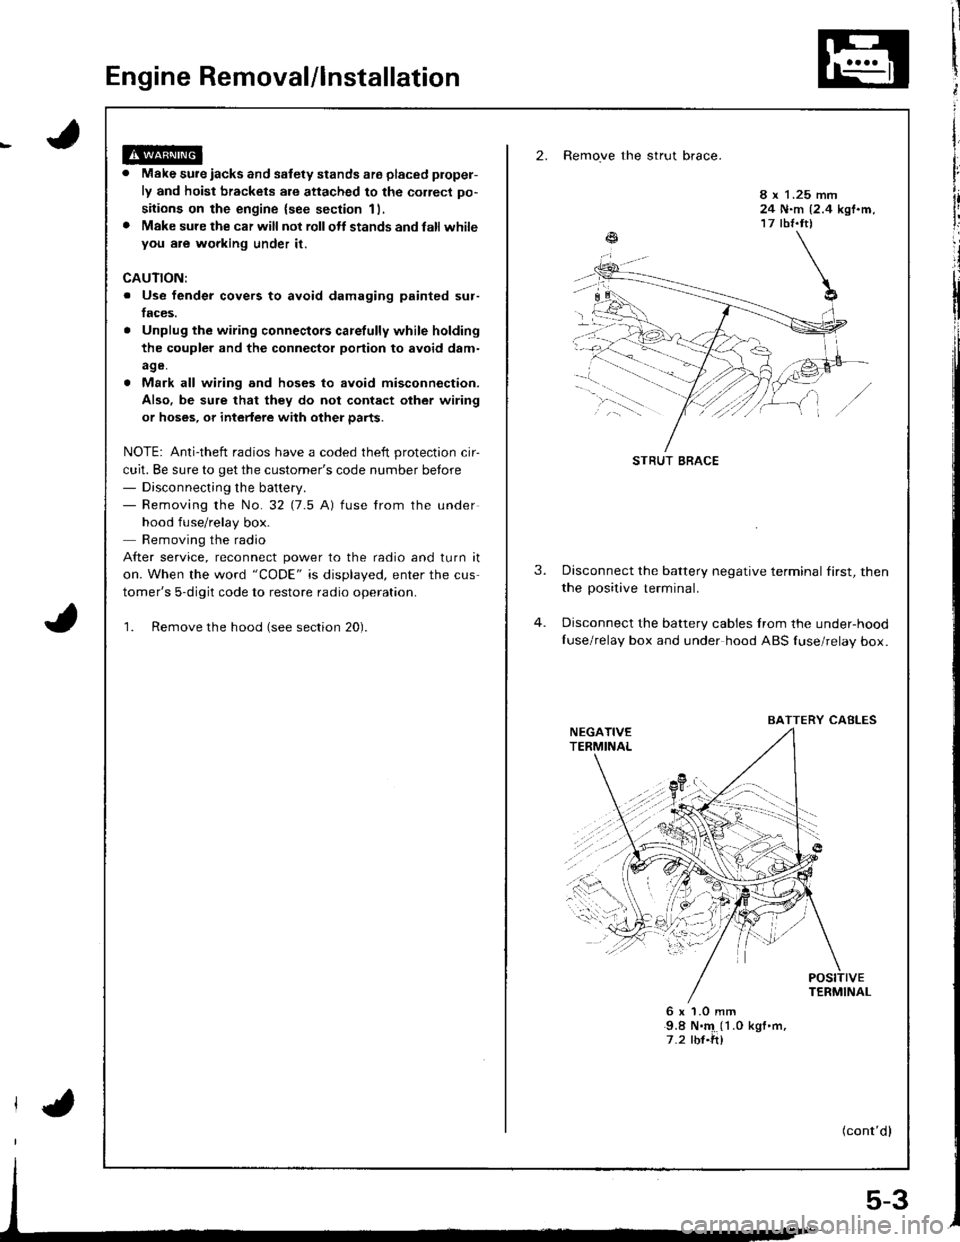 ACURA INTEGRA 1998  Service Repair Manual Engine Removal/lnstallation
2. Remove the strut brace.
Make sure iacks and safety stands ate placed plopel-
ly and hoist brackets are attached to the correct po-
sitions on the engine {see section 11,